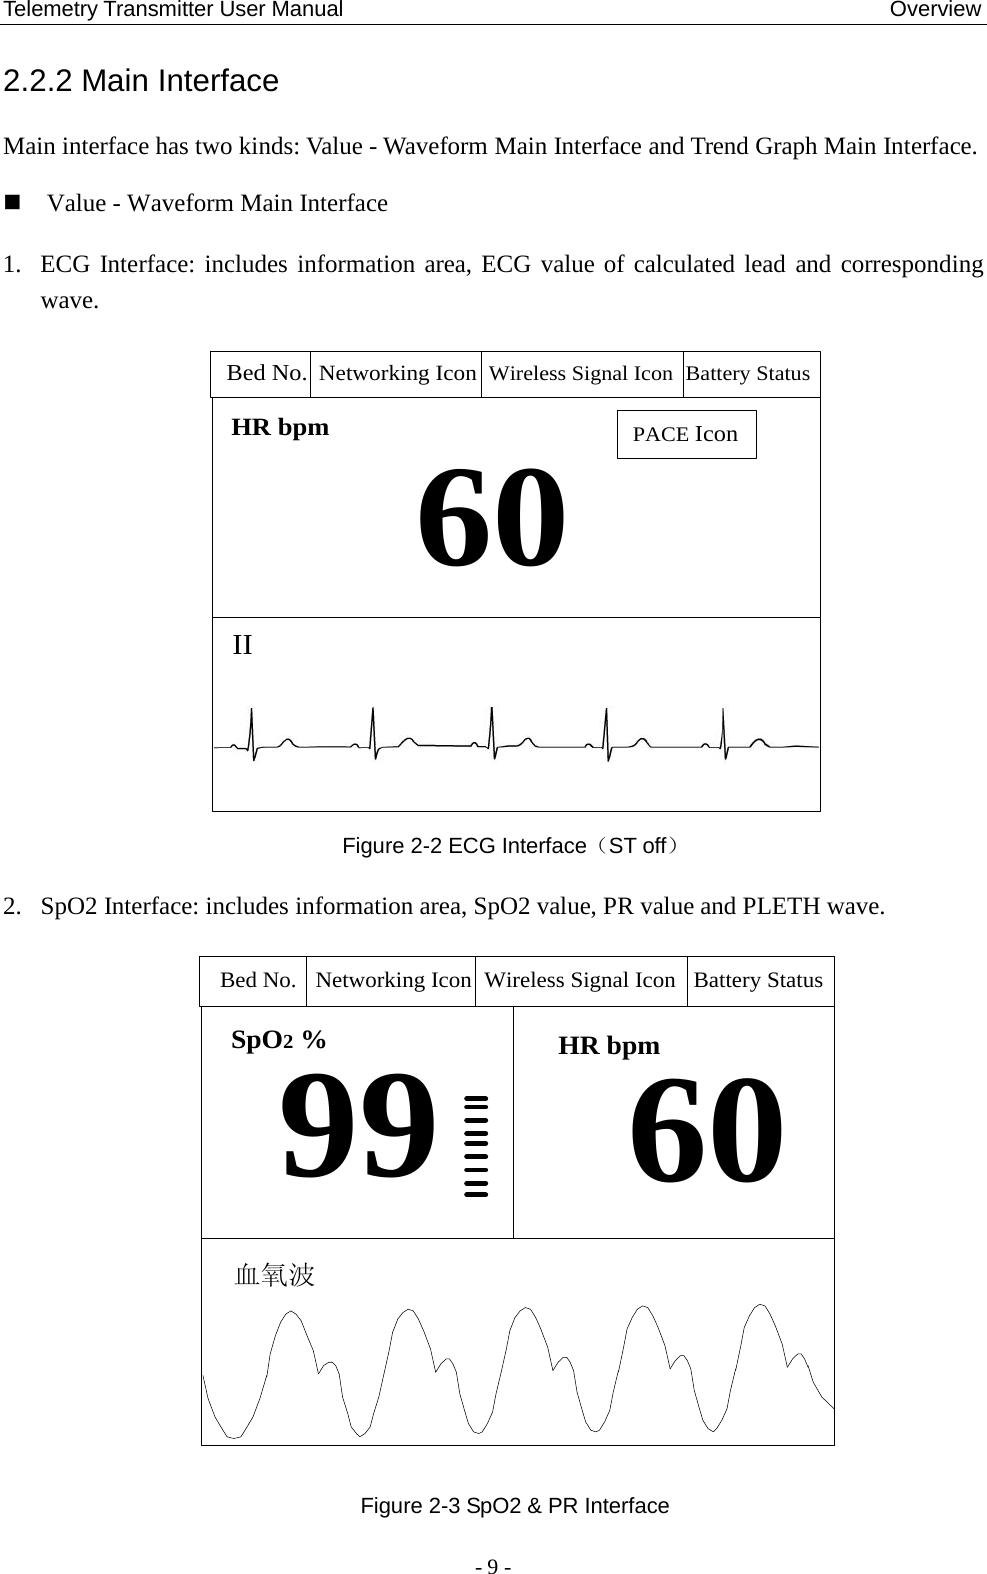 Telemetry Transmitter User Manual                                                  Overview 2.2.2 Main Interface Main interface has two kinds: Value - Waveform Main Interface and Trend Graph Main Interface.  Value - Waveform Main Interface   1. ECG Interface: includes information area, ECG value of calculated lead and corresponding wave. 60HR bpmIIPACE IconBed No. Networking Icon Battery StatusWireless Signal Icon Figure 2-2 ECG Interface（ST off） 2. SpO2 Interface: includes information area, SpO2 value, PR value and PLETH wave. SpO2 %99血氧波60HR bpmBed No. Networking Icon Battery StatusWireless Signal Icon Figure 2-3 SpO2 &amp; PR Interface  - 9 - 